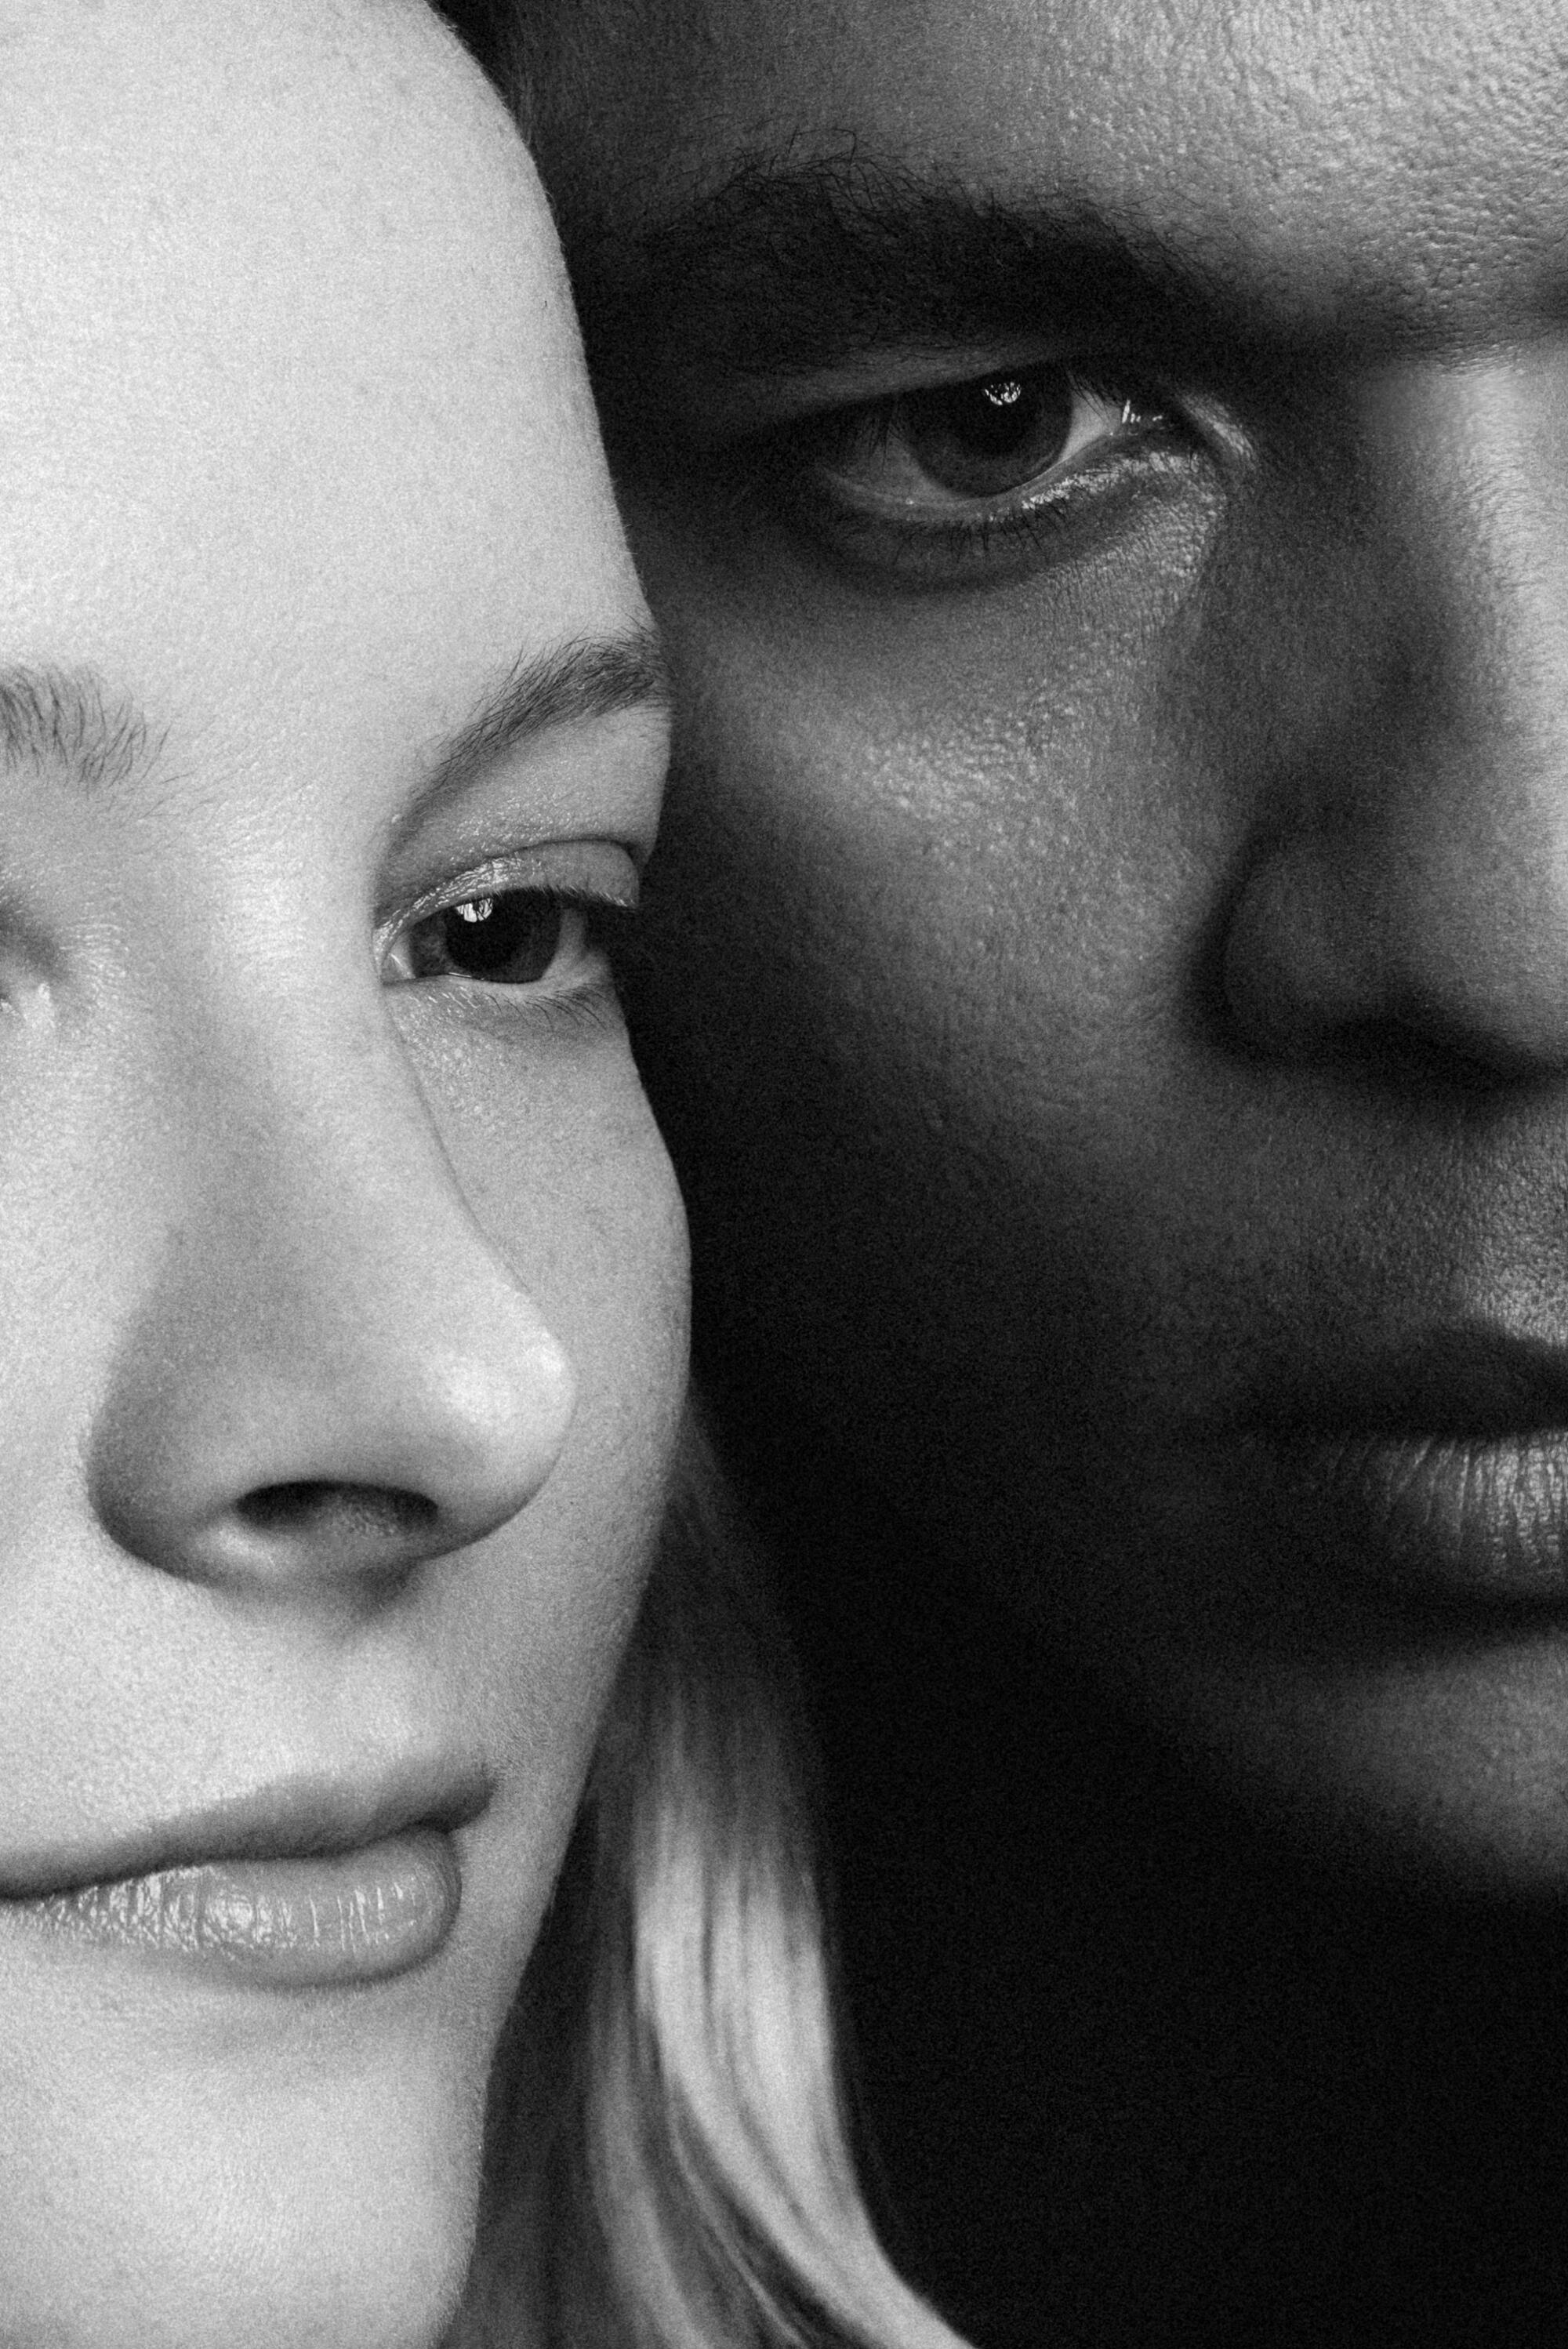 A close-up black-and-white photo of Morfydd Clark and Ismael Cruz Córdova, whose faces are half out of view.